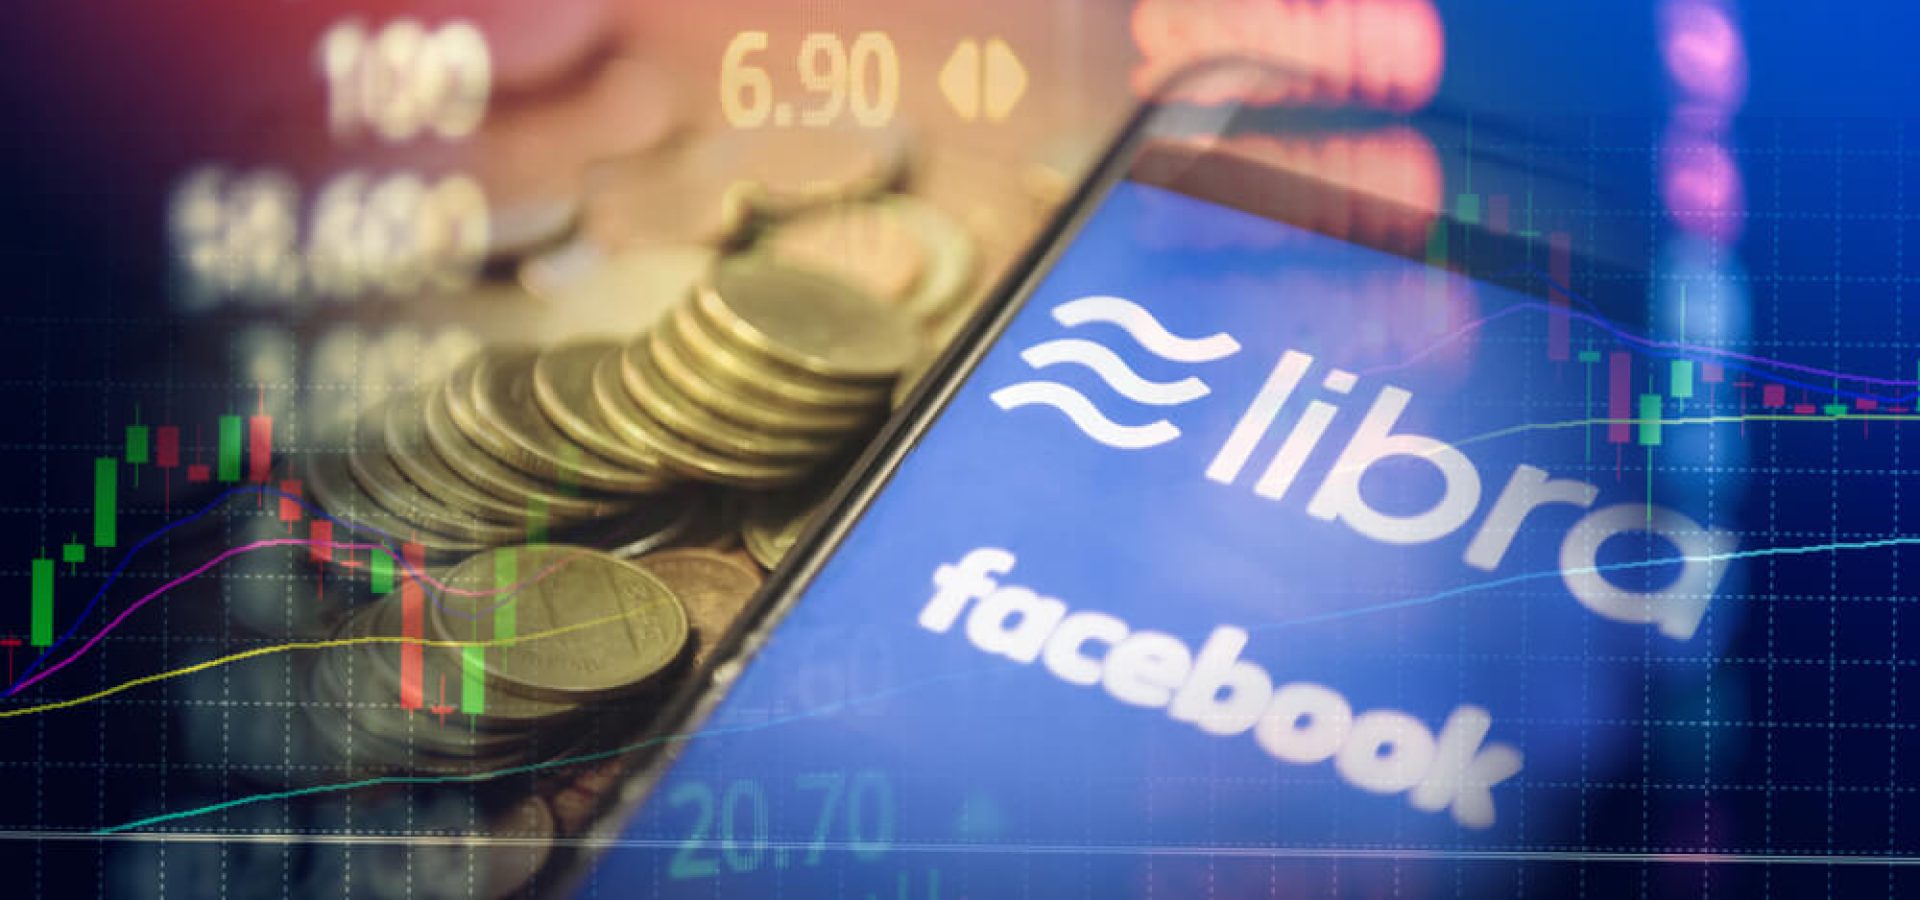 Wibest – Fb: Persons handling phones discussing further goals regarding the digital coin.